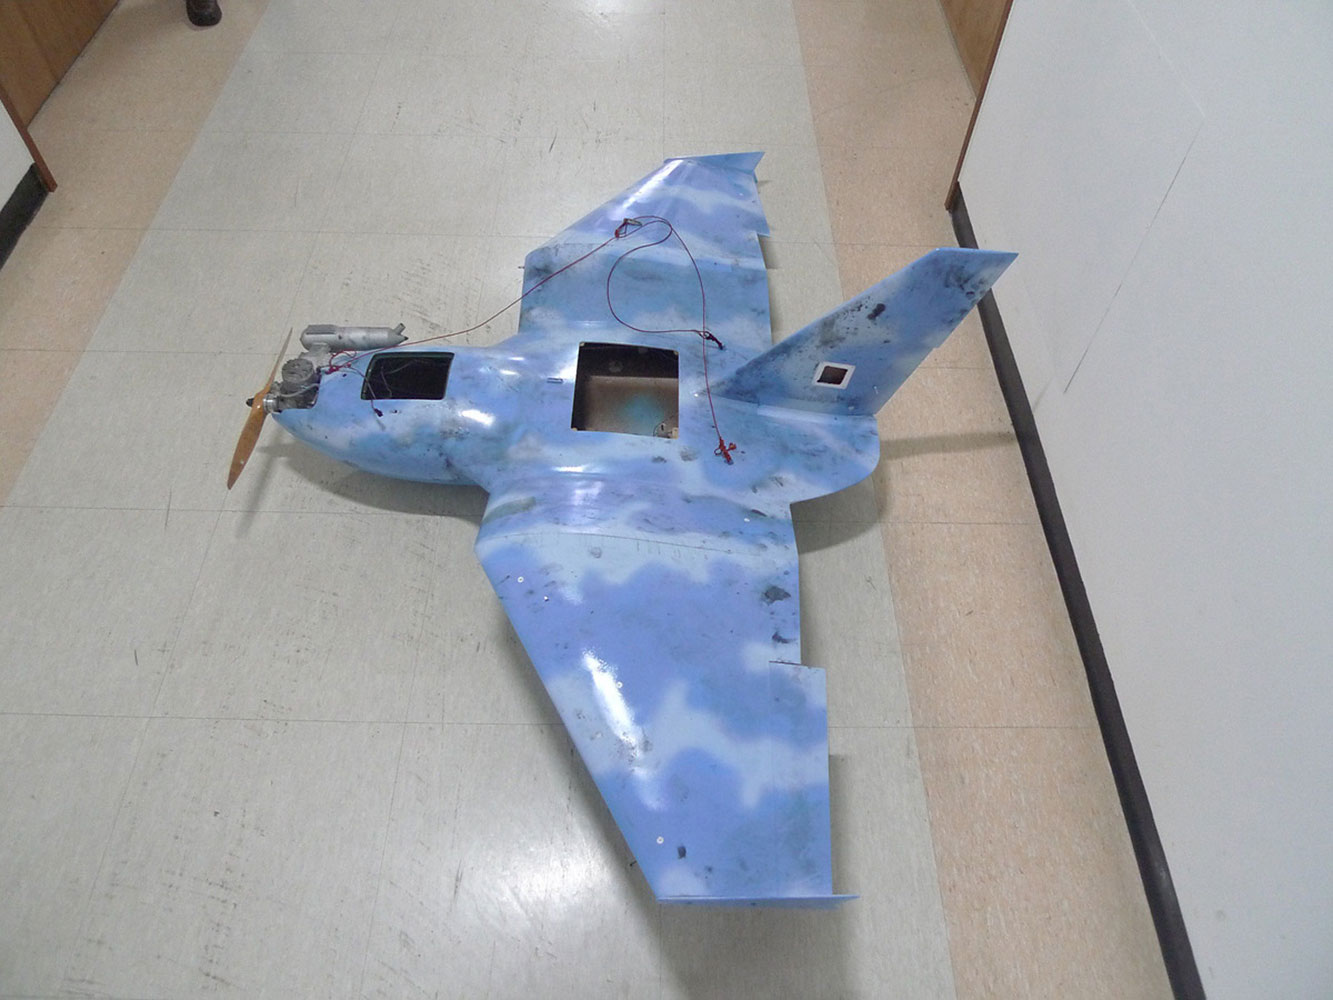 A crashed drone found on March 24, 2014 in Paju, north of Seoul.